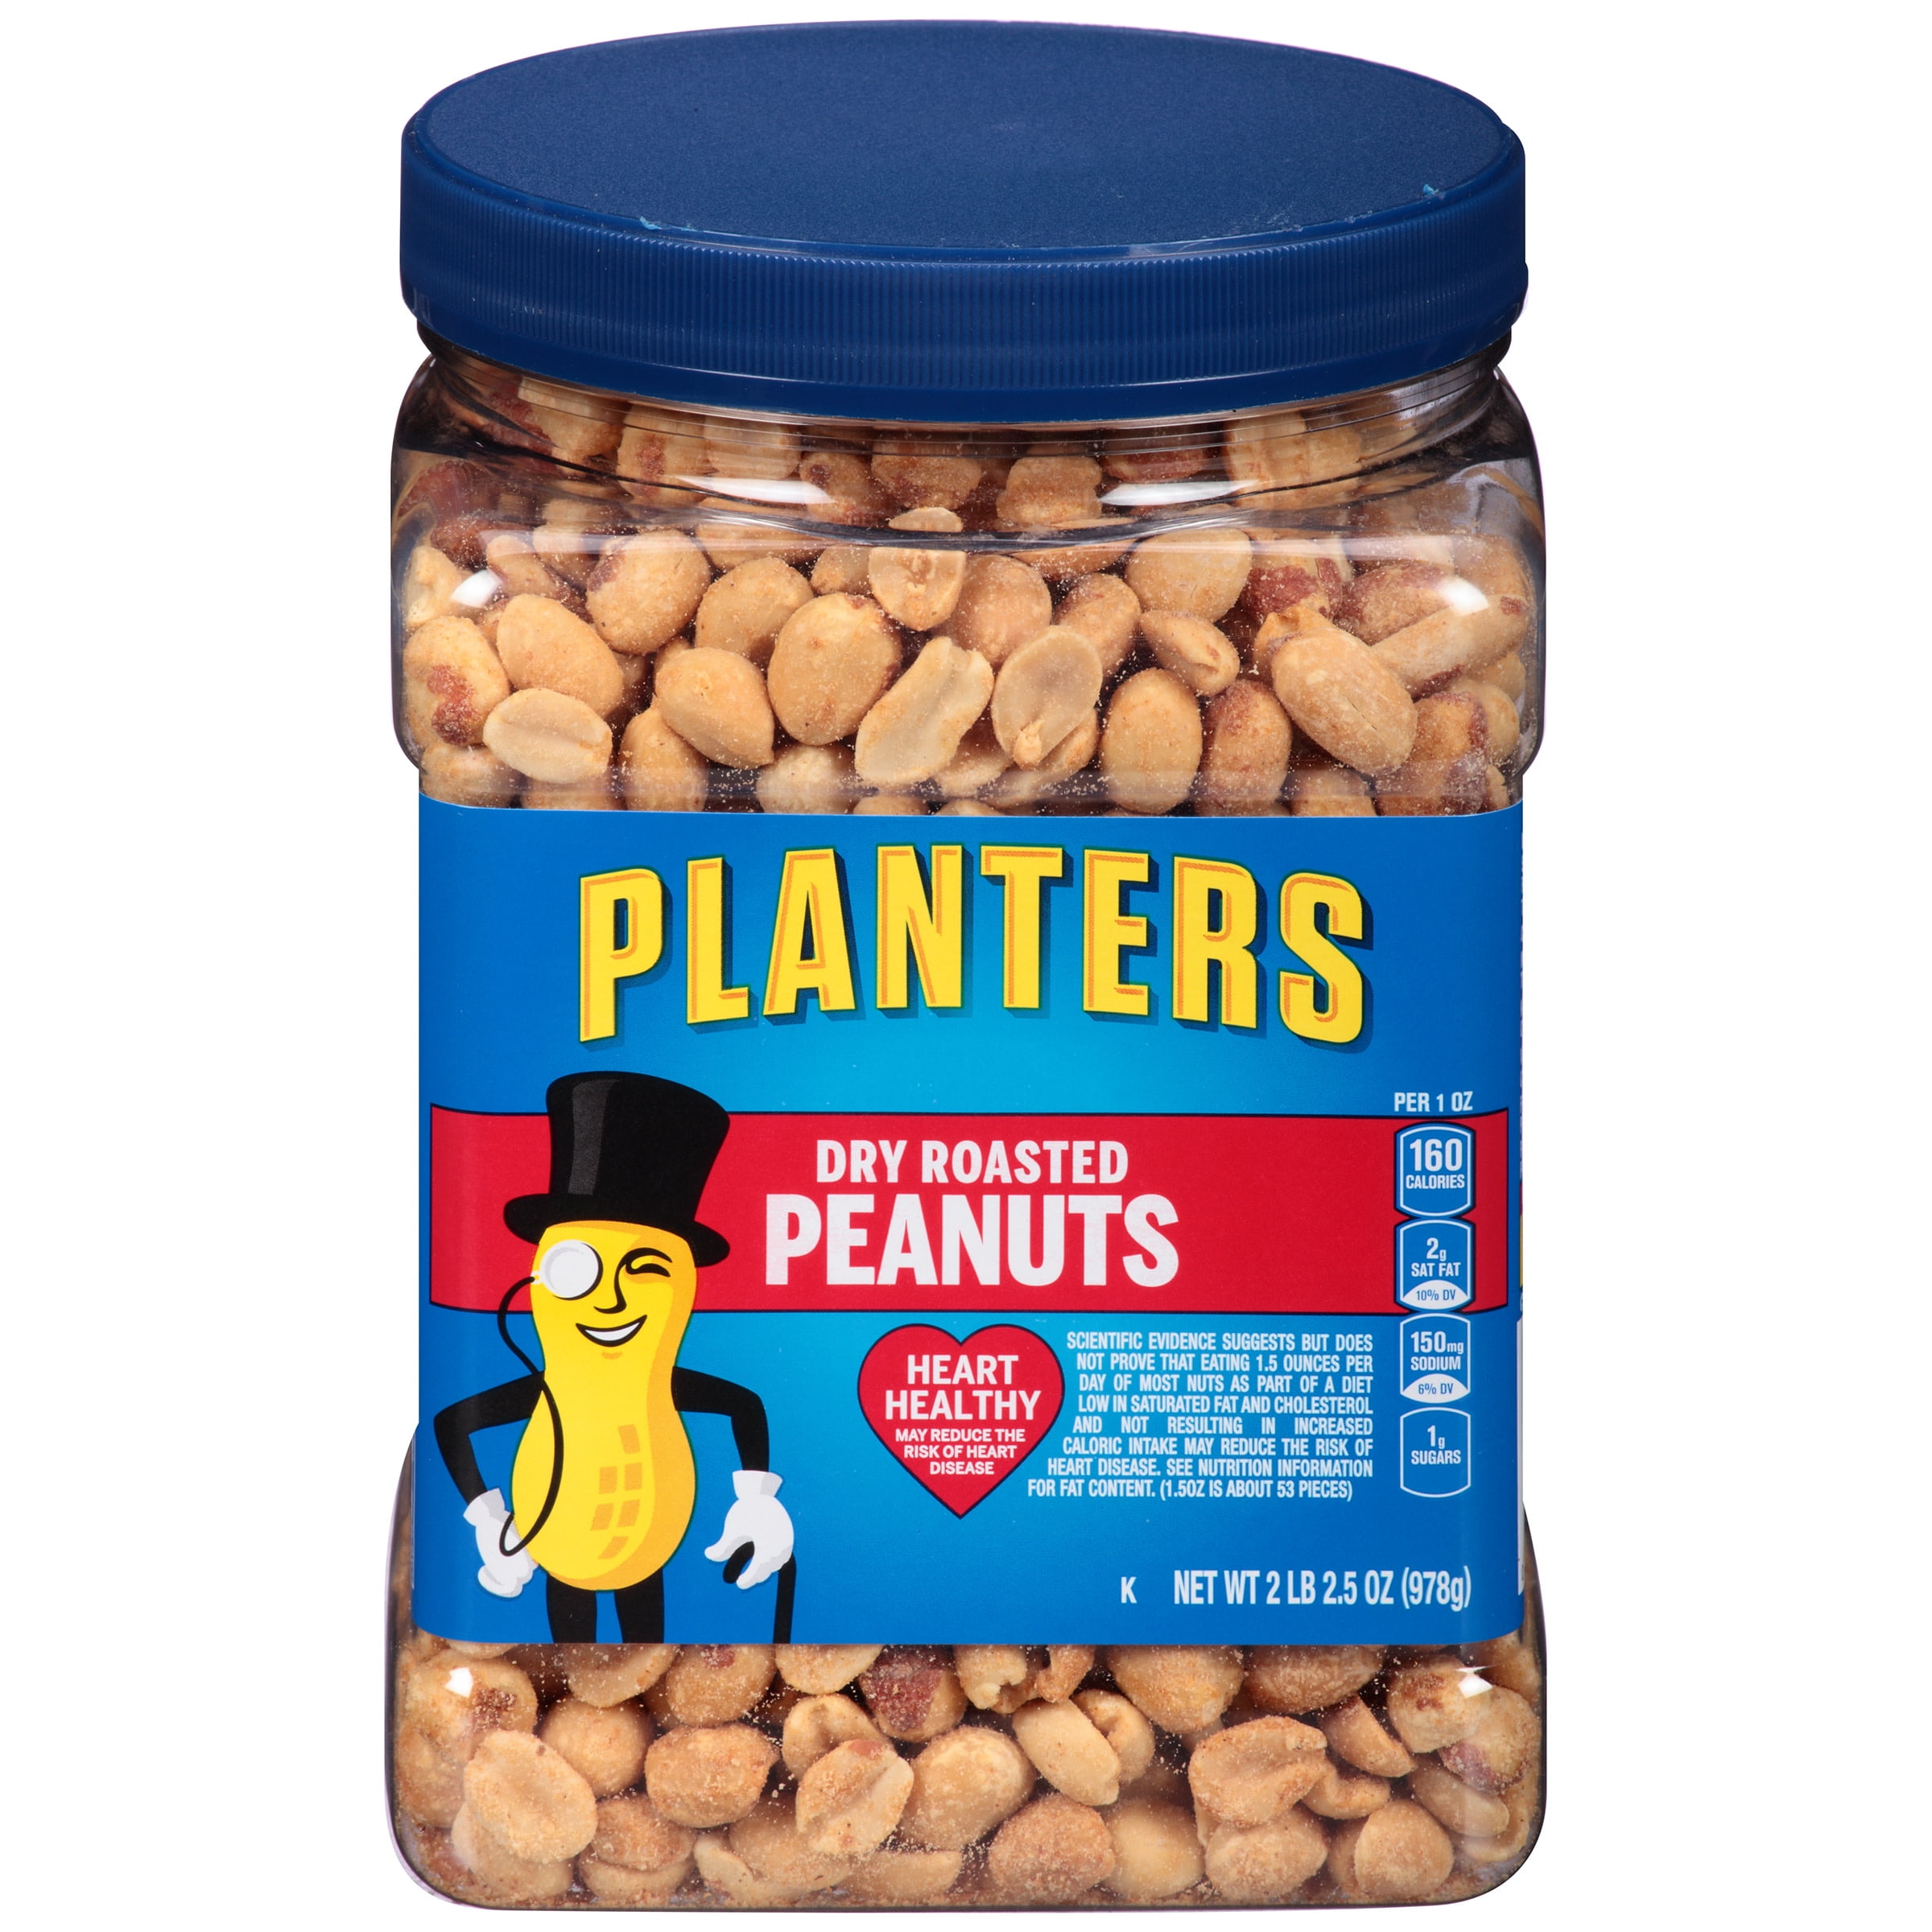 Planters Dry Roasted Peanuts, 2.16 lb Container